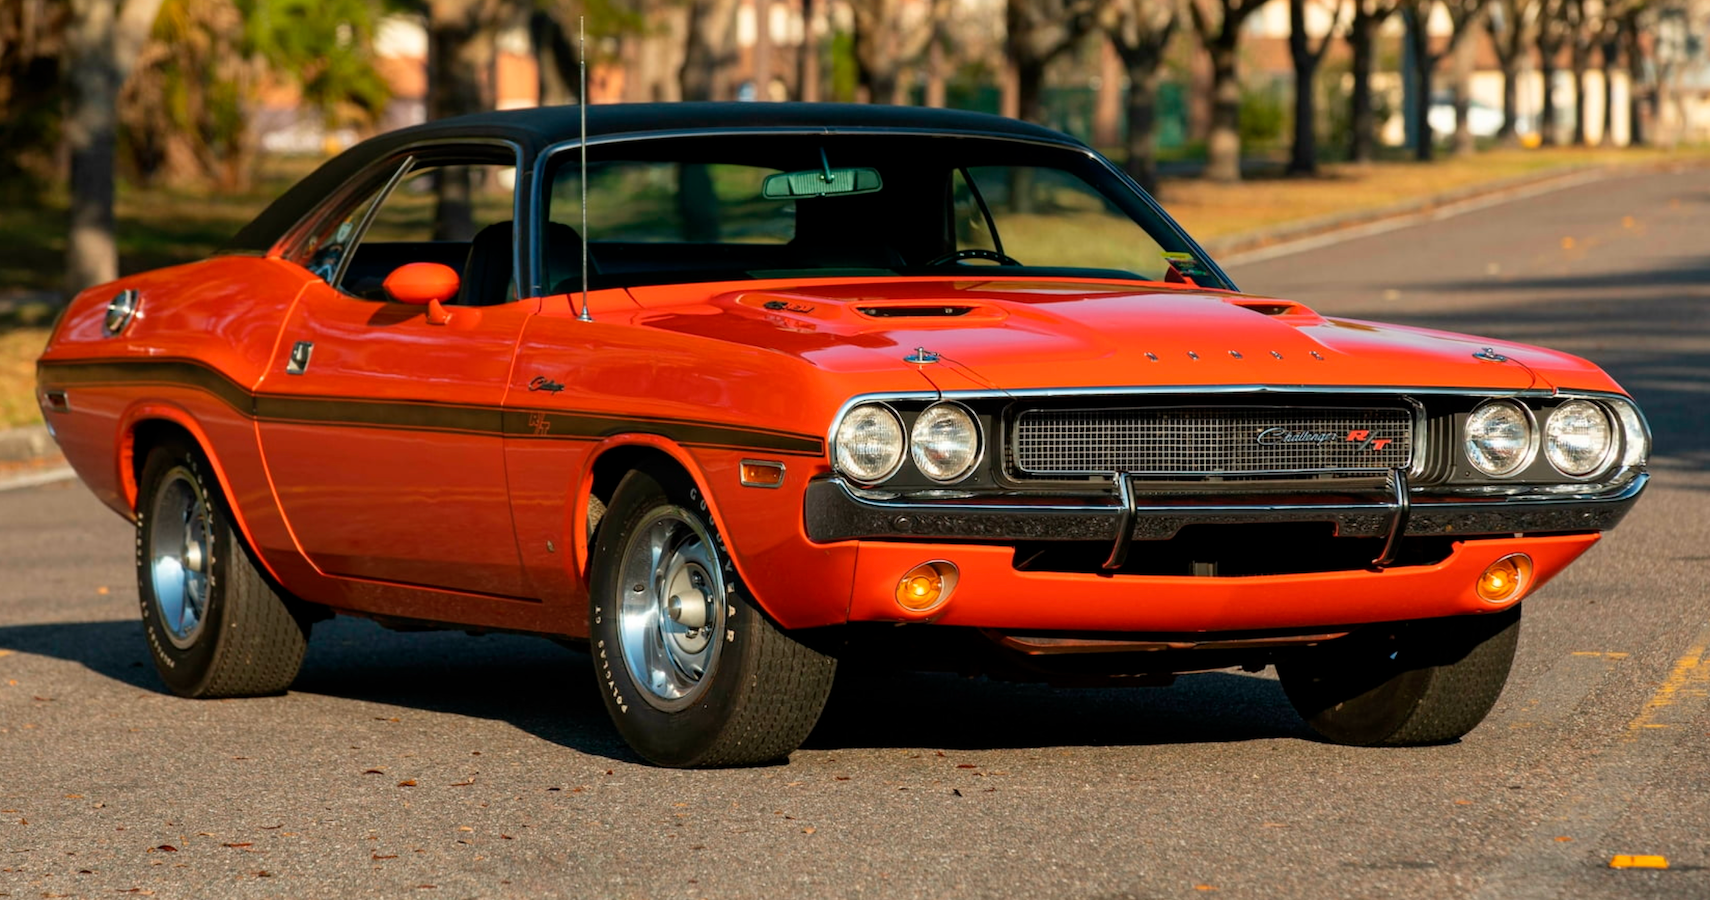 Dodge Challenger R/T from 1970